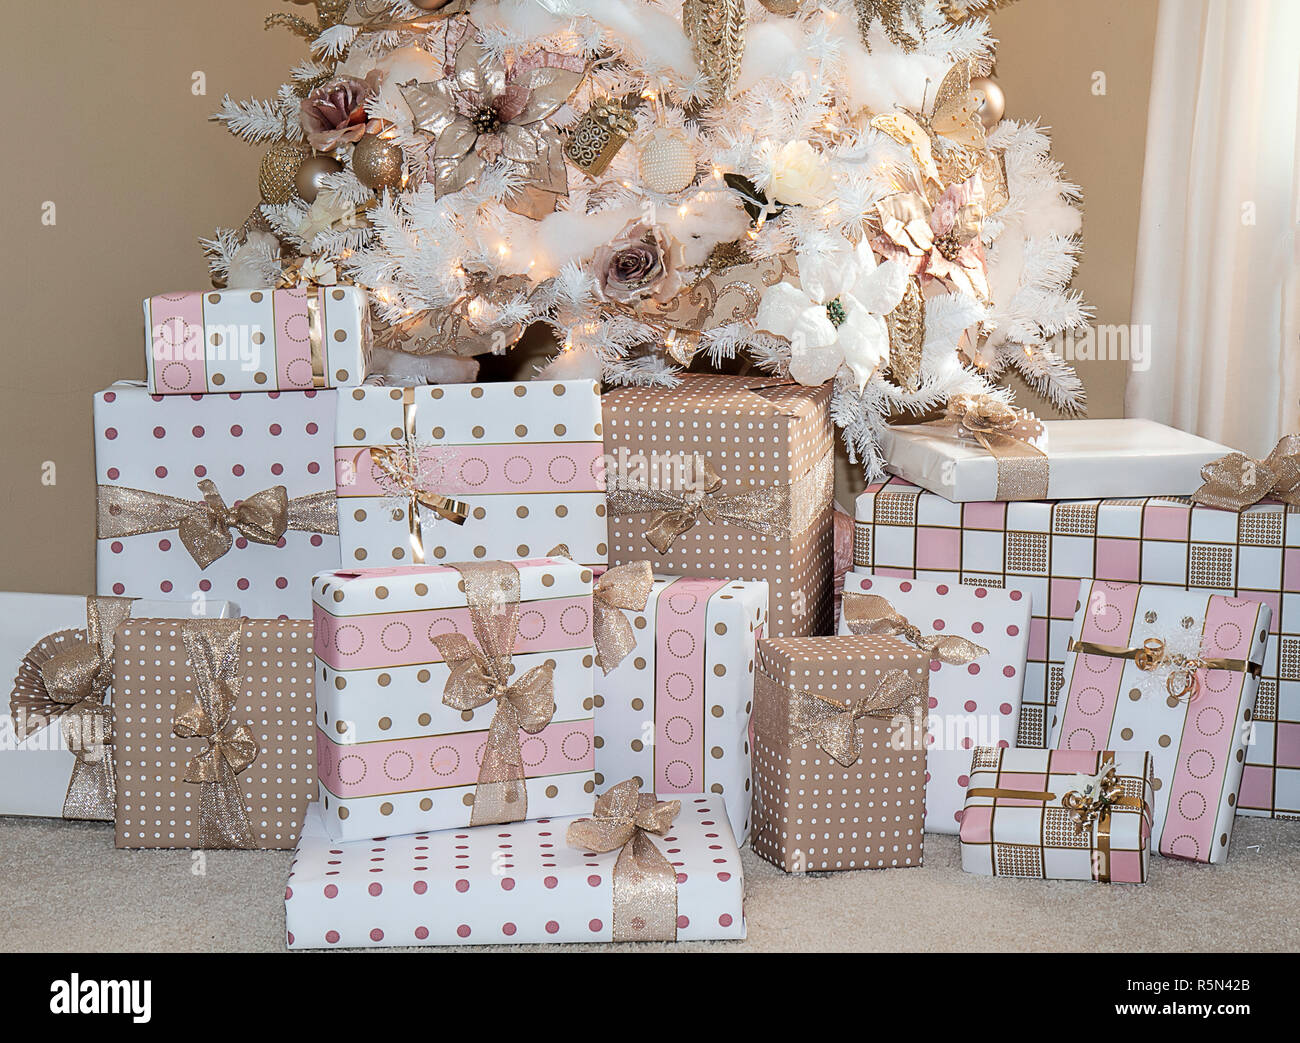 White dreamy Christmas tree in living room of home decorated in popular blush pink ornaments and gifts below in matching wrapping paper. Stock Photo